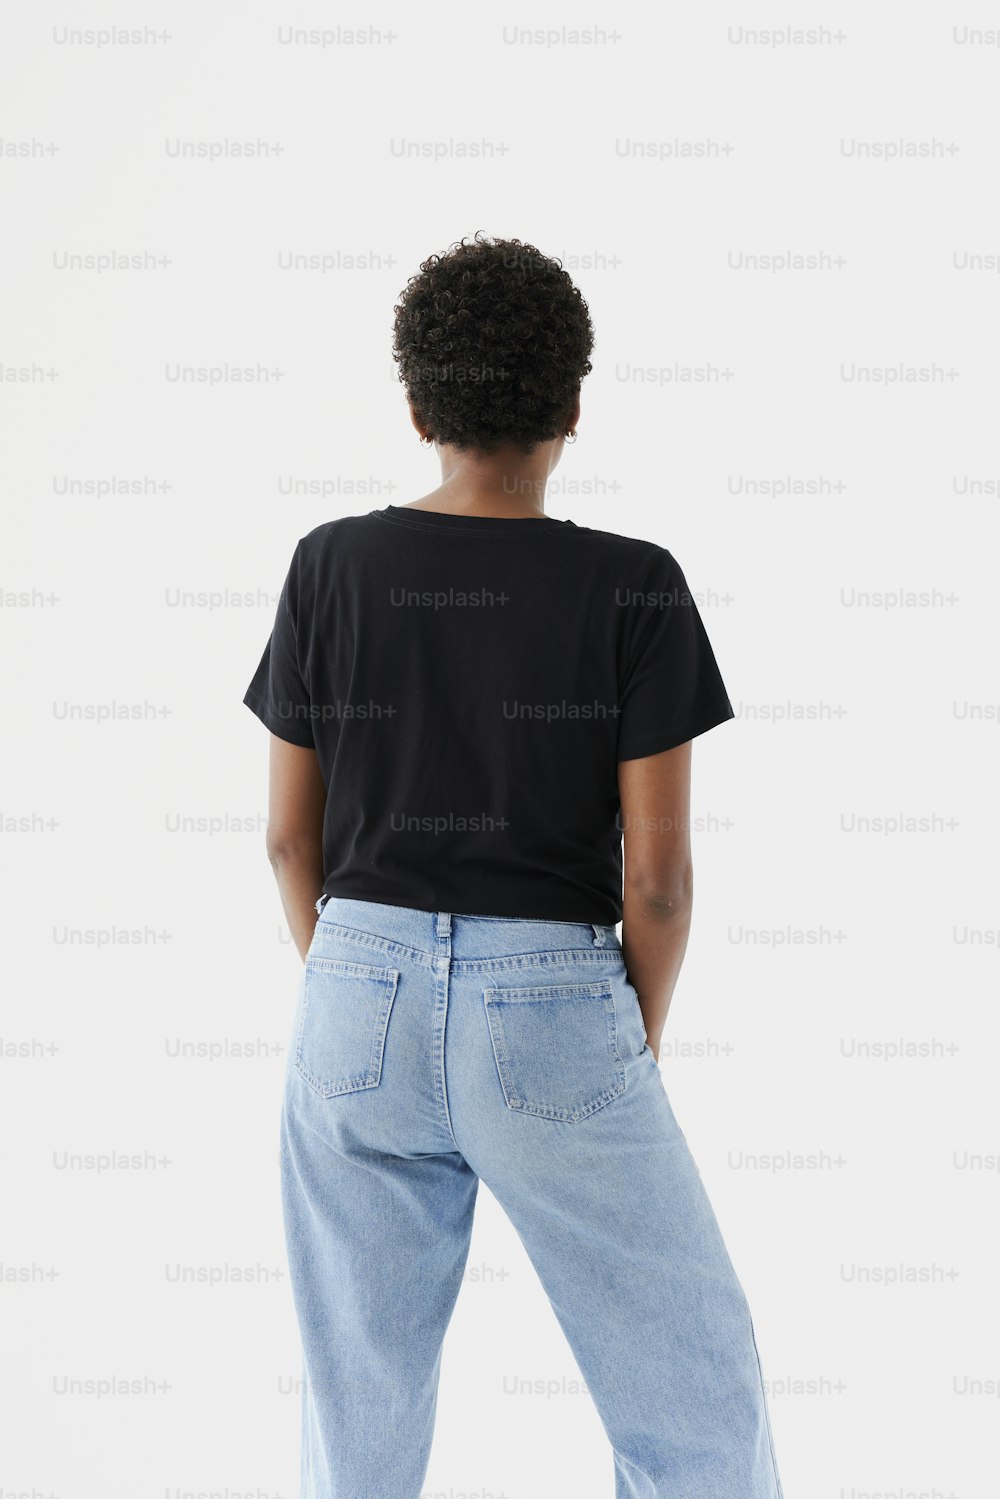 Blank Tshirt Pictures  Download Free Images on Unsplash